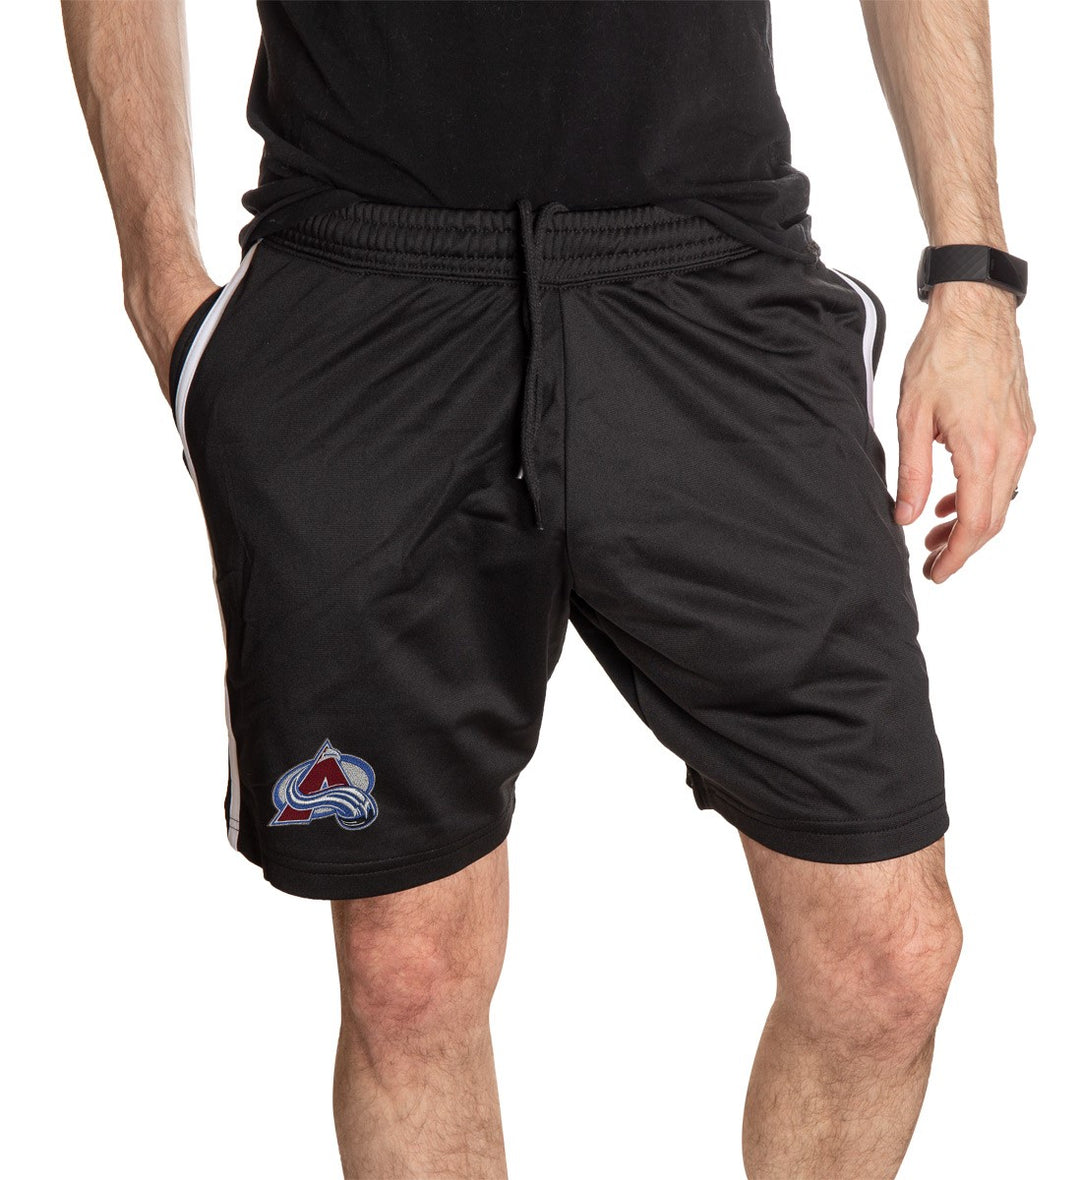 Colorado Avalanche Two-Stripe Shorts for Men Front View.